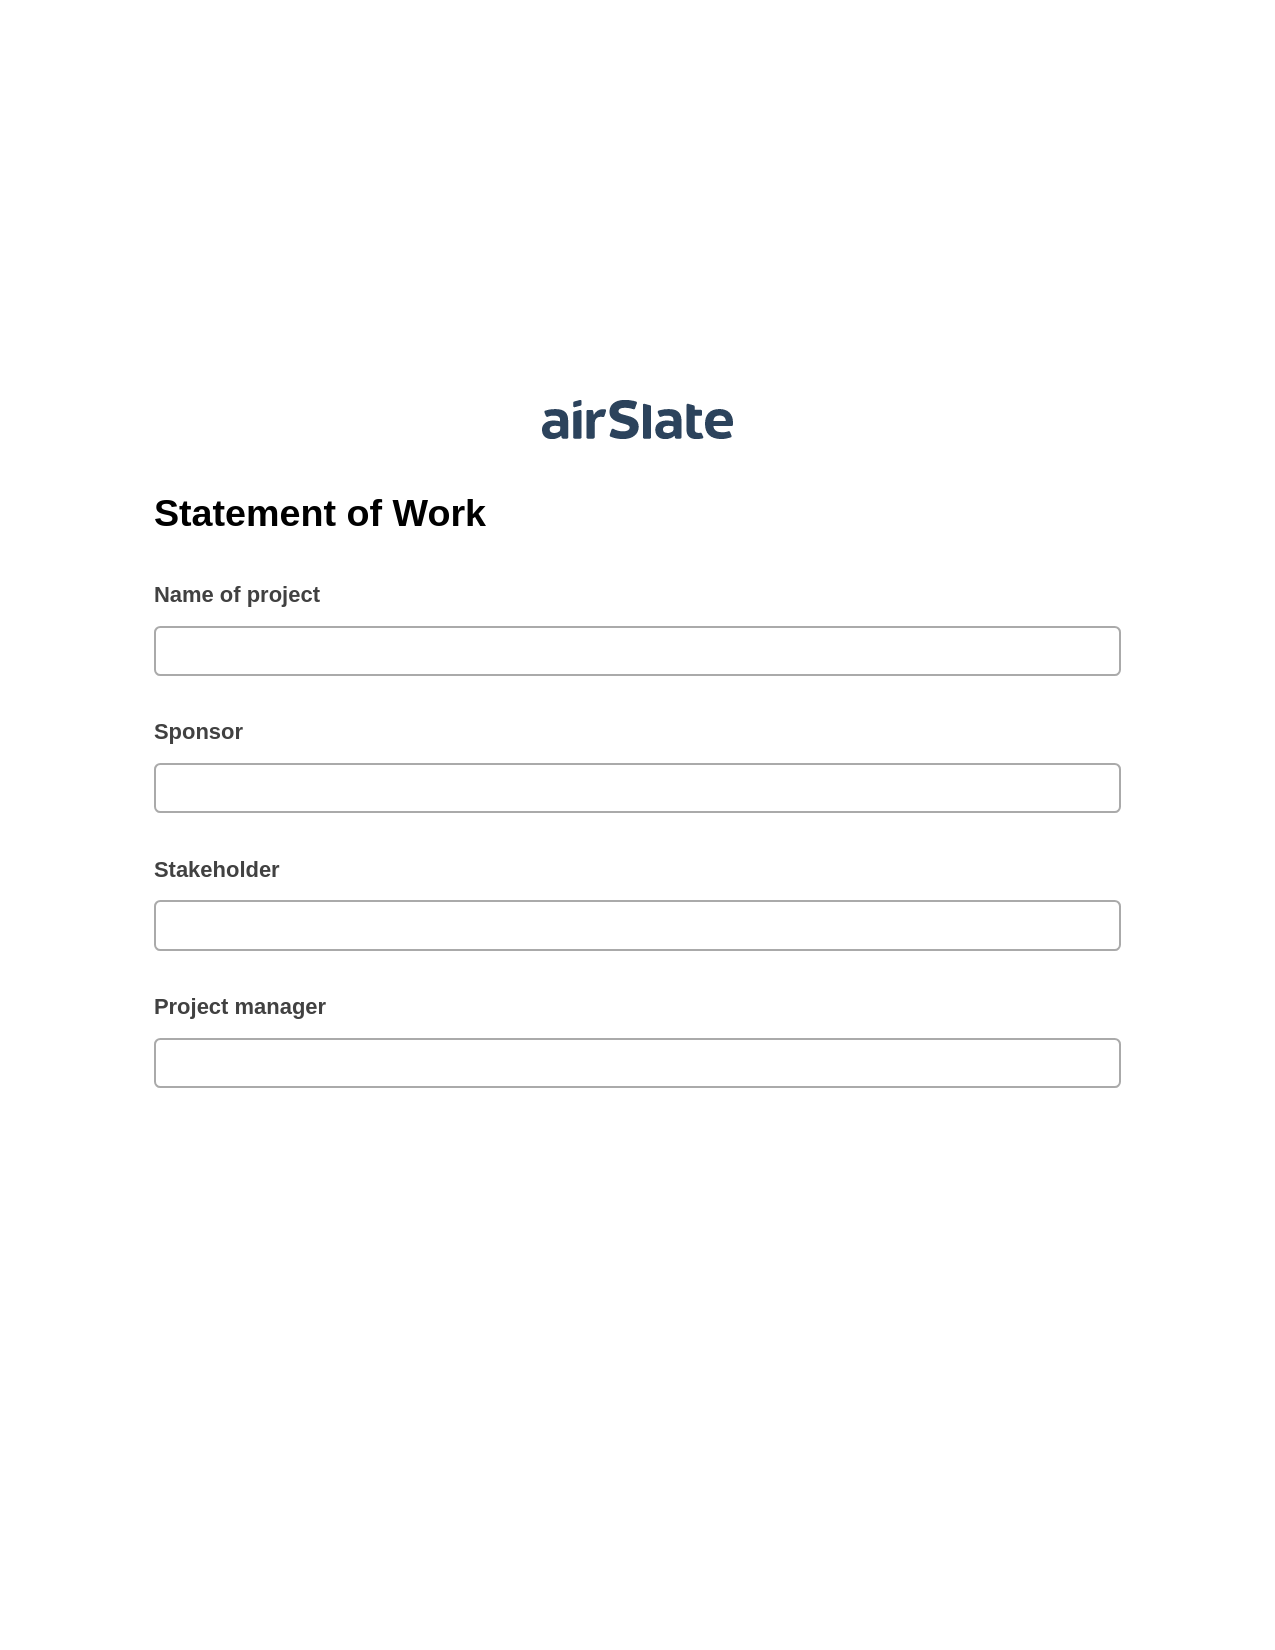 Statement of Work Pre-fill Document Bot, Assign Roles to Recipients Bot, Export to Formstack Documents Bot